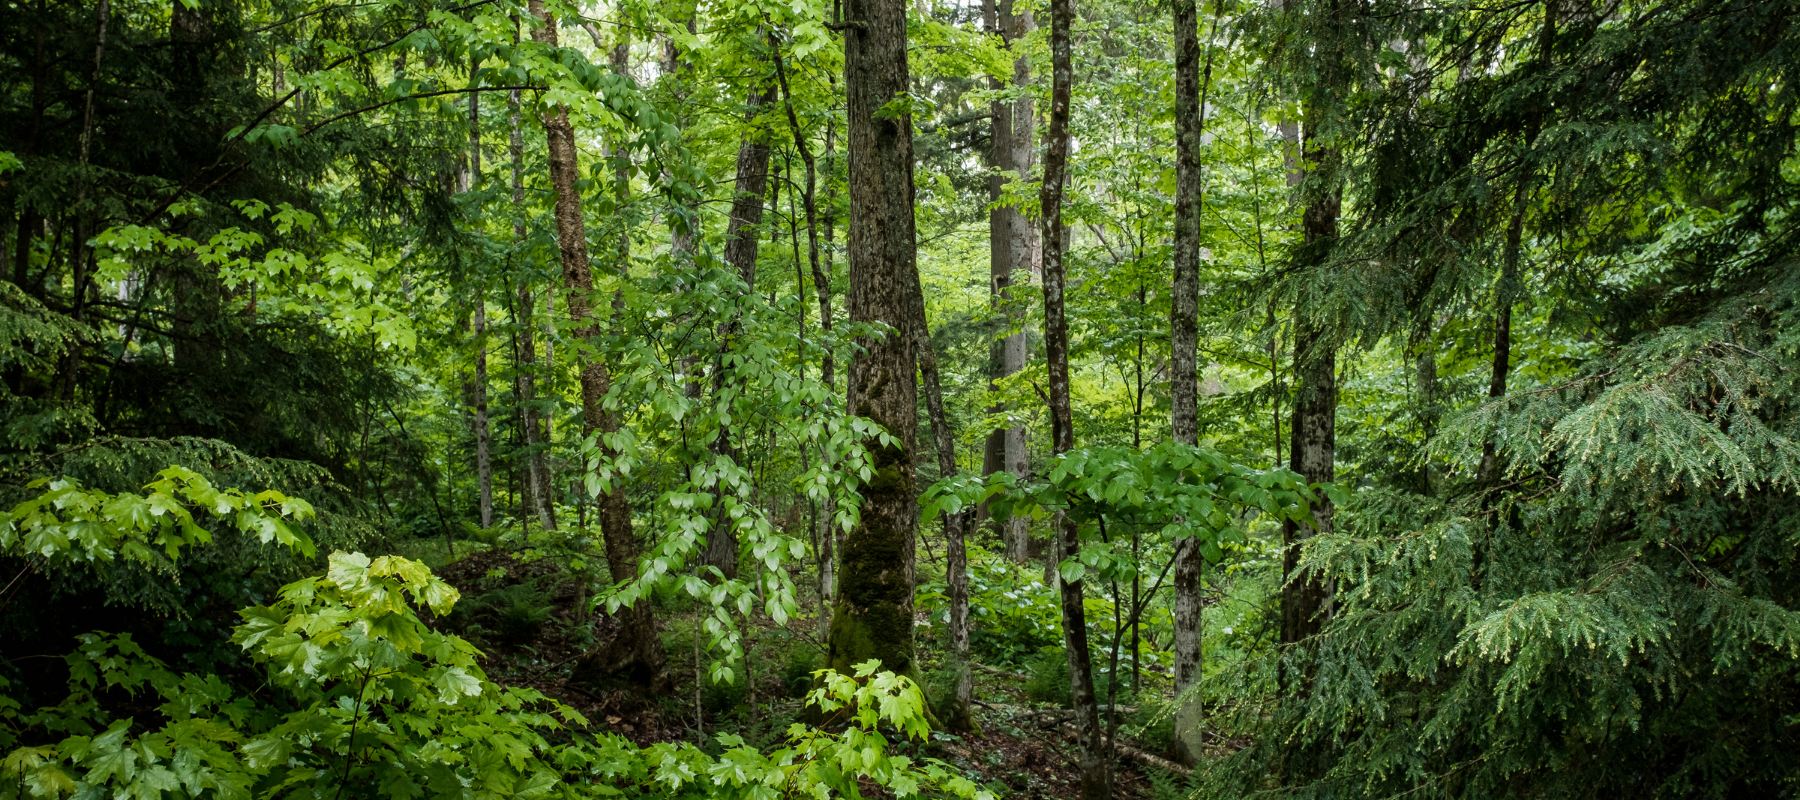 Why our forests are so precious